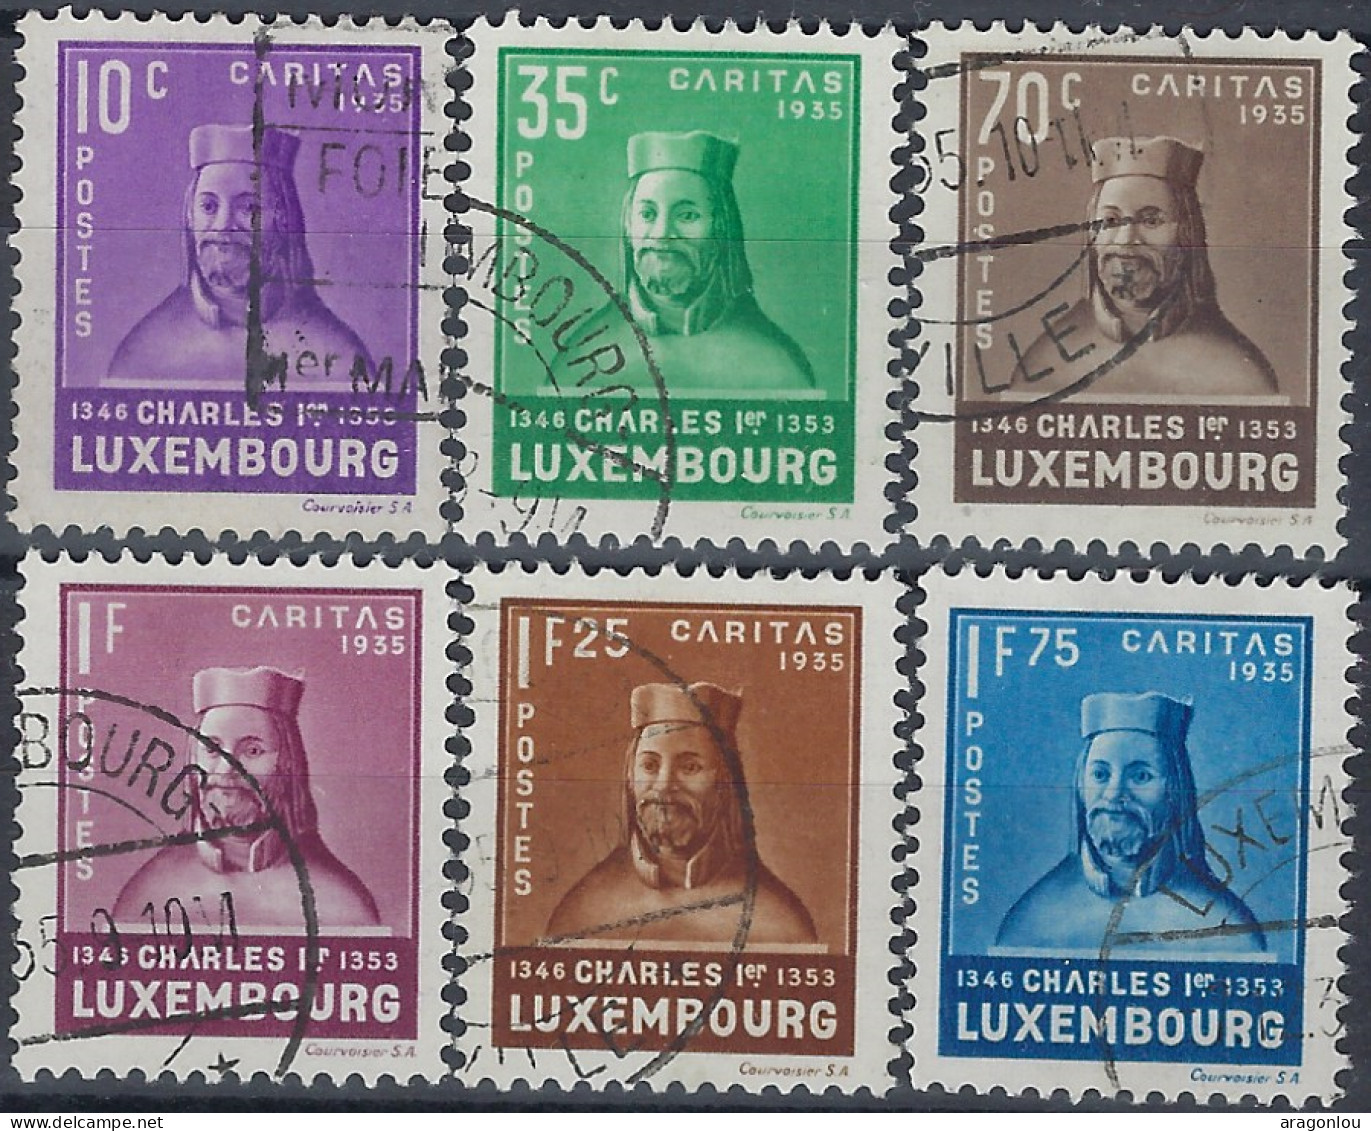 Luxembourg - Luxemburrg - Timbres  1935    Charles Le 1ier     Série   ° - Gebraucht